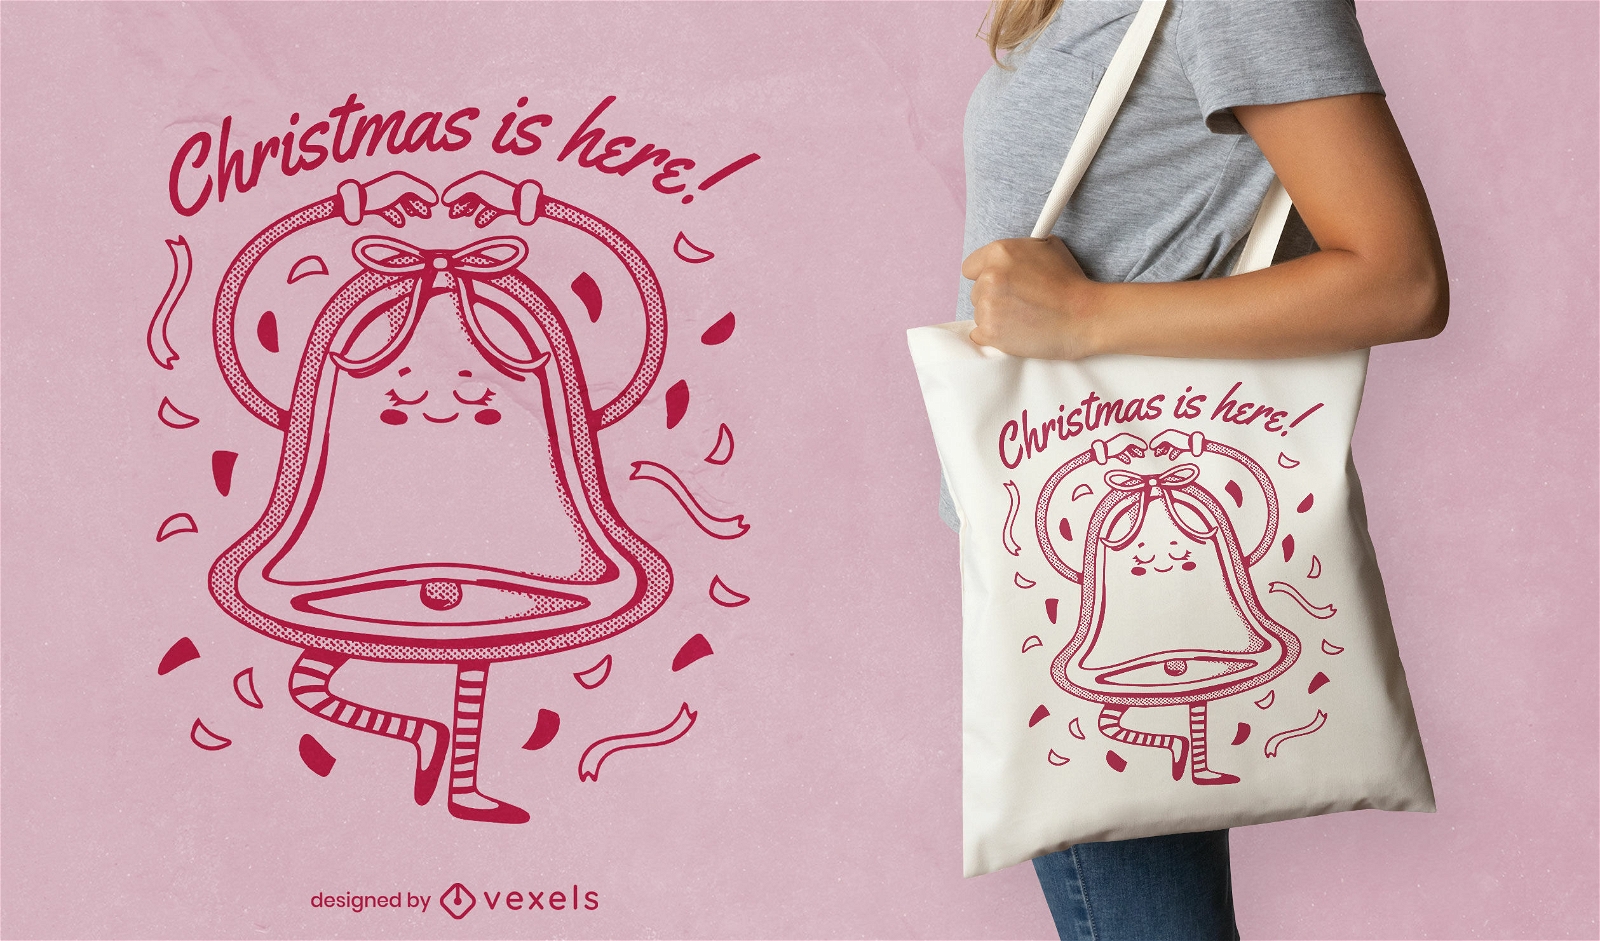 Christmas bell quote tote bag design